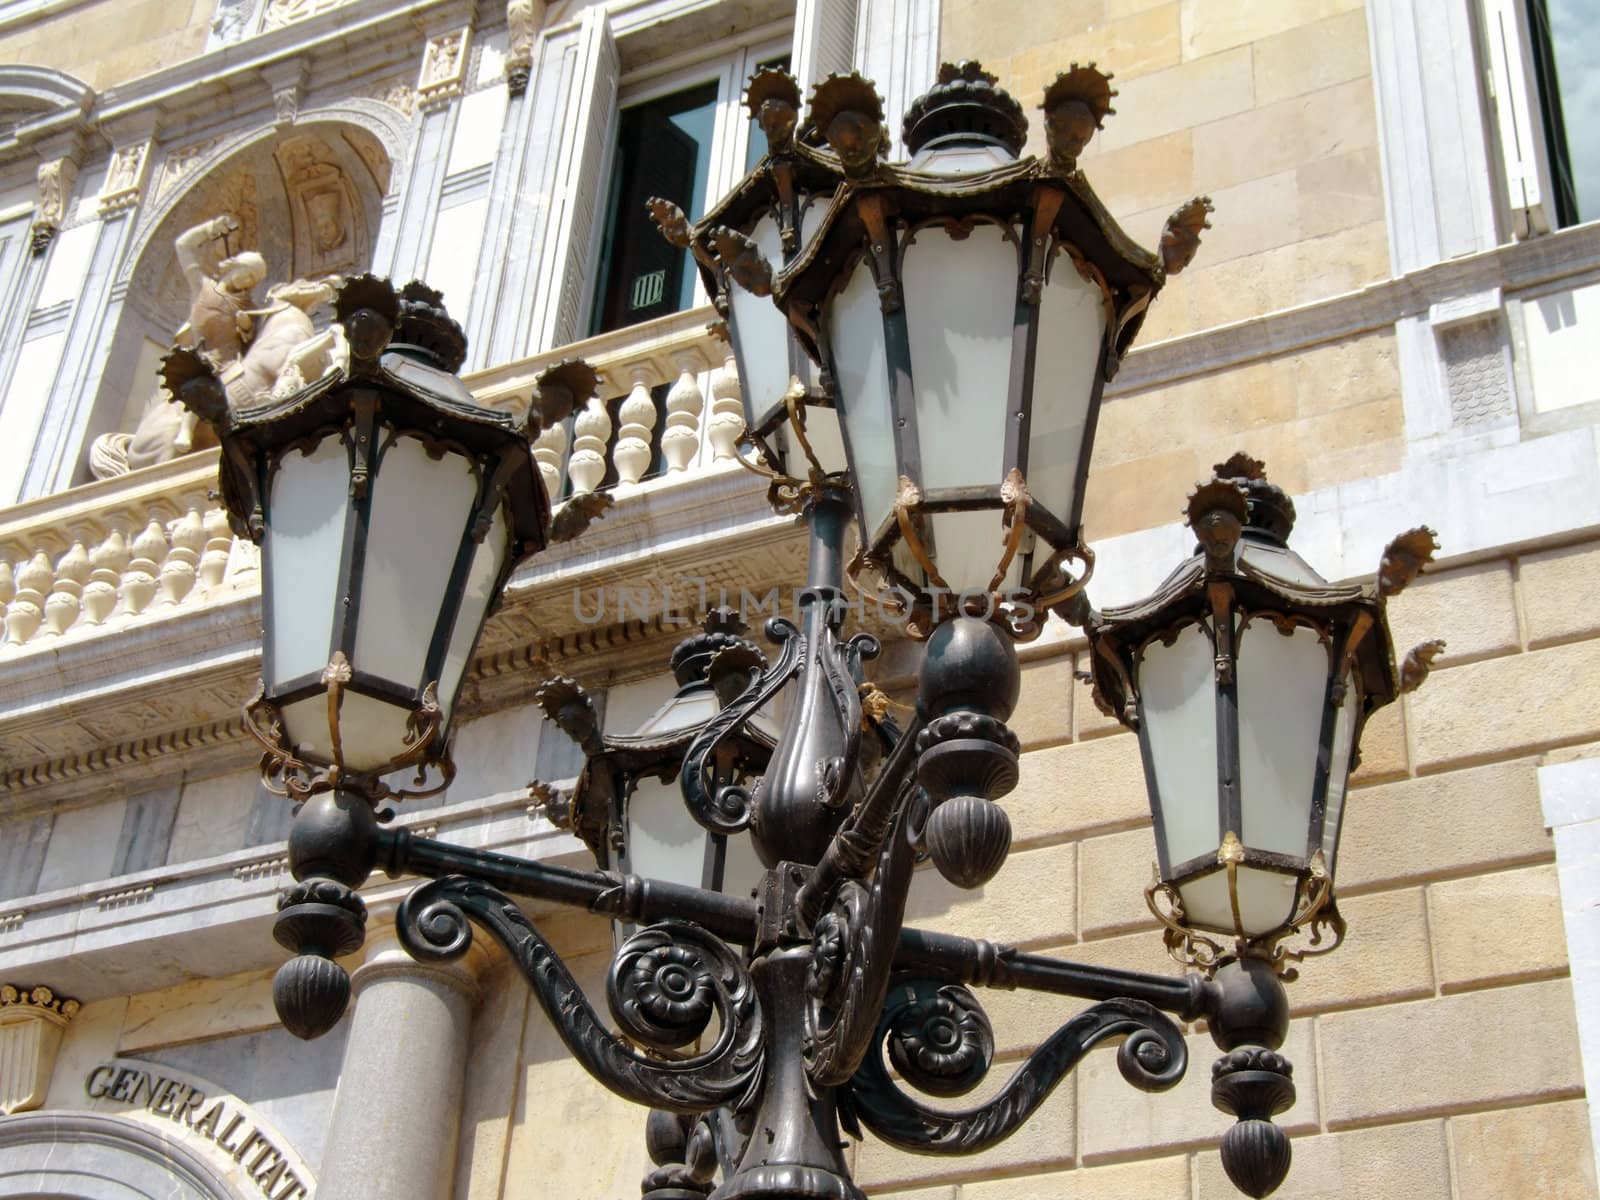 Close-up of a street lamp in the historical center of Barcelona